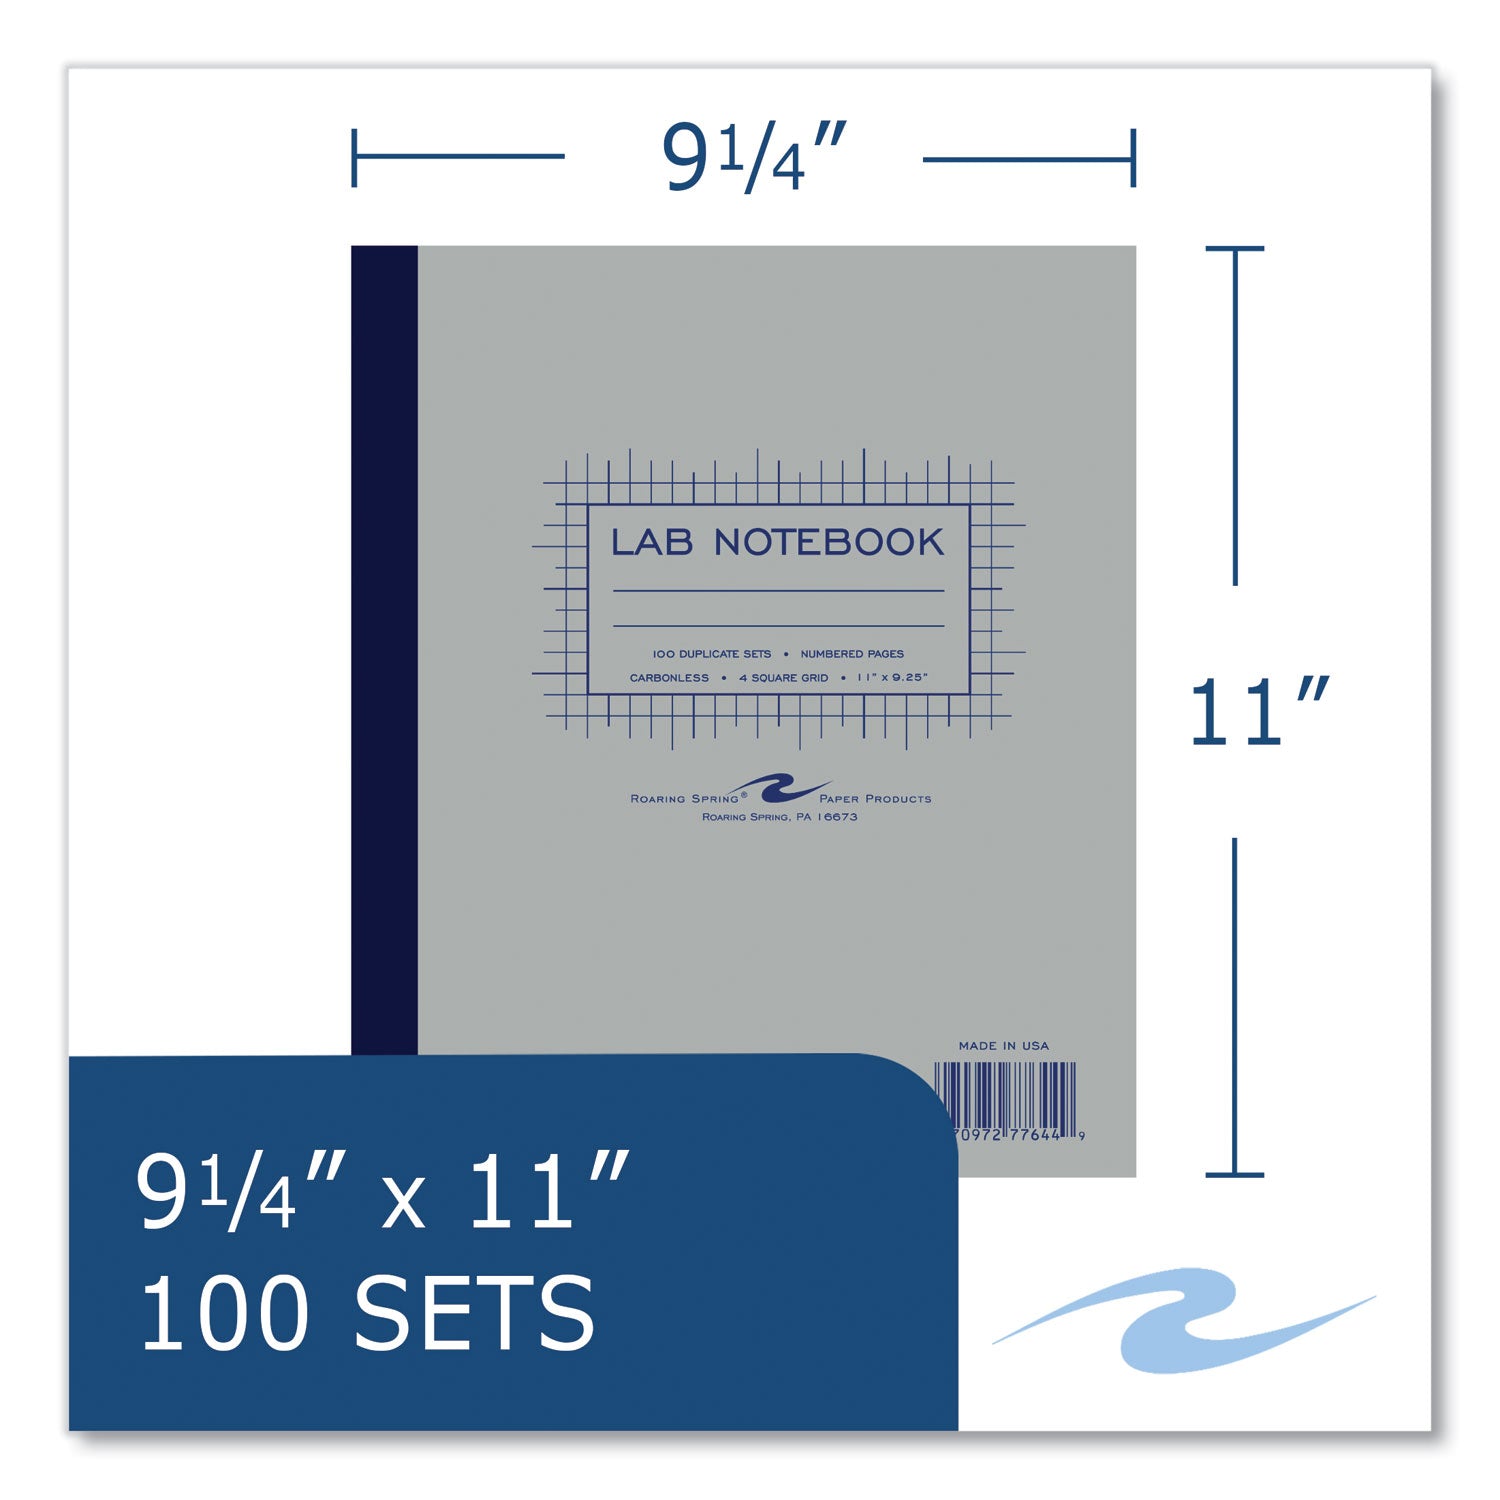 lab-and-science-carbonless-notebook-quad-rule-4-sq-in-gray-cover-200-11-x-925-sheets-5-ctships-in-4-6-business-days_roa77644cs - 5